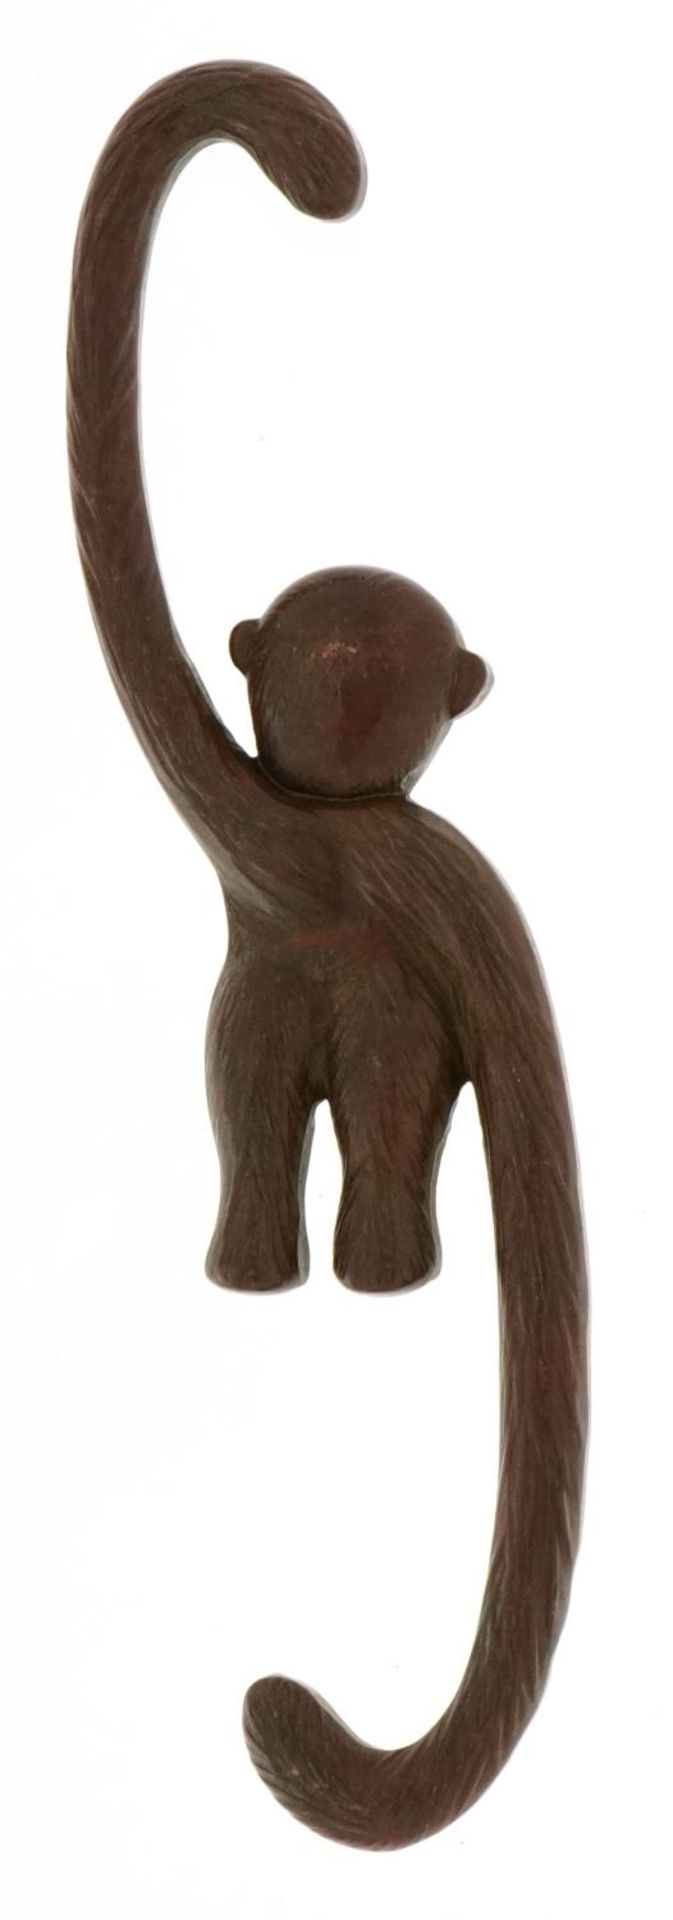 Japanese patinated bronze monkey with impressed mark, 14.5cm in length - Image 2 of 3